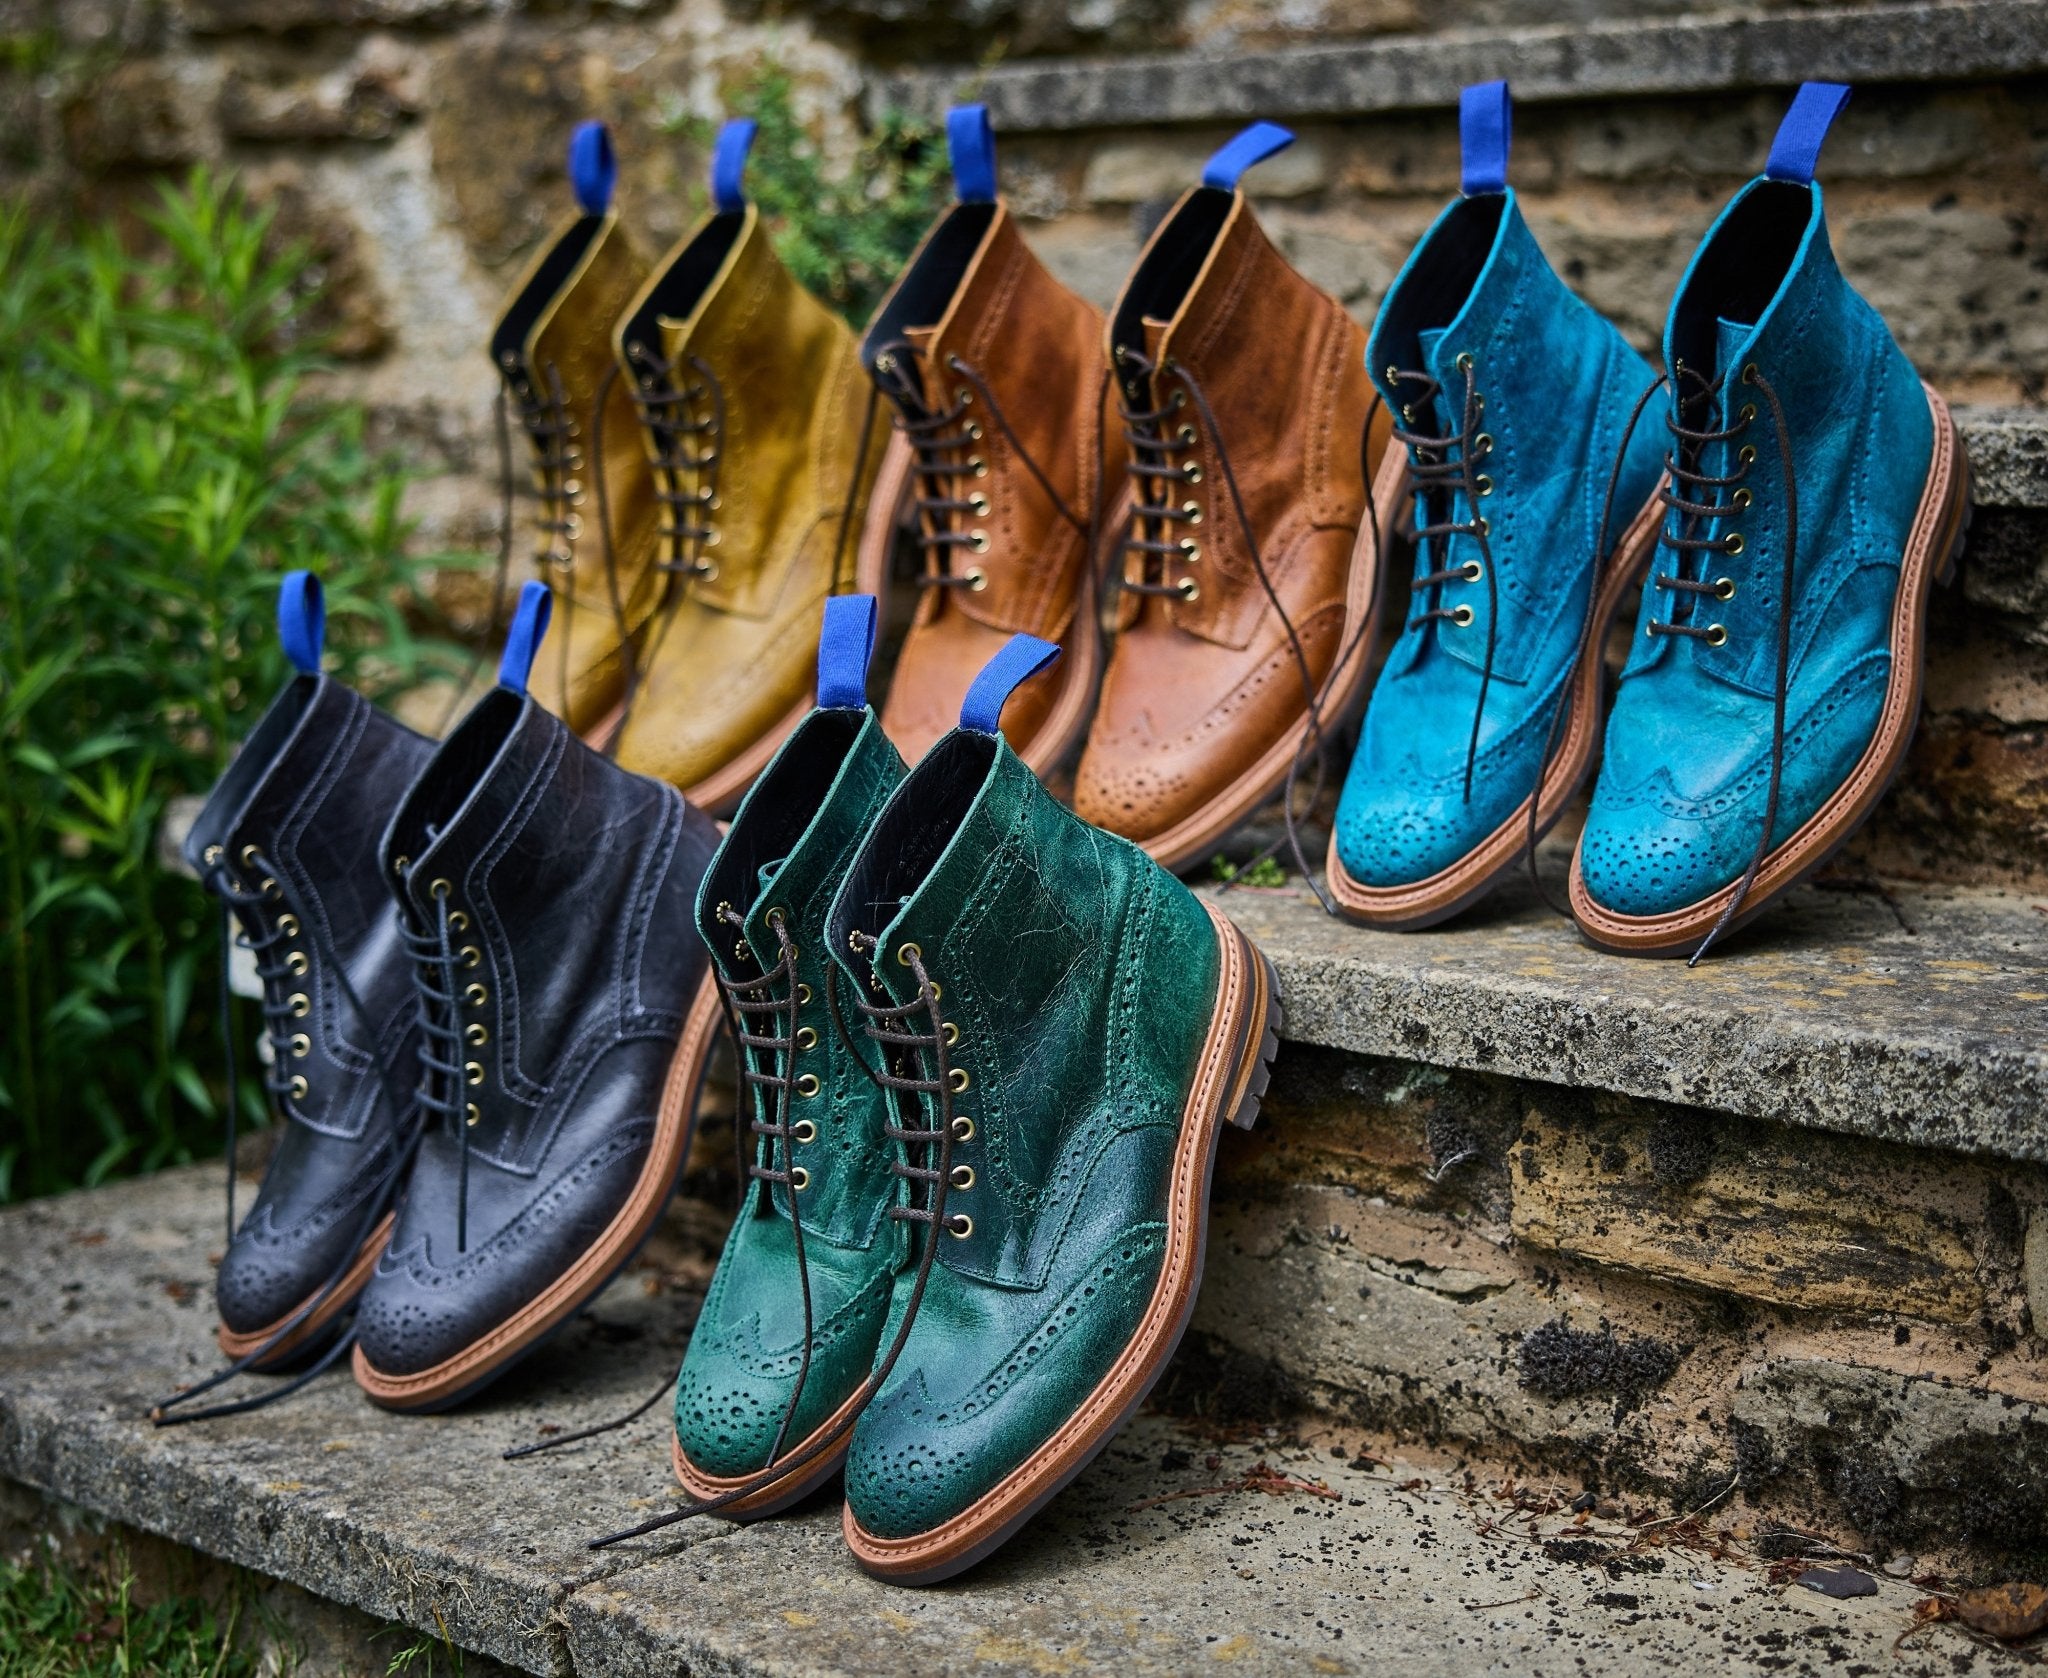 Tricker's Country Shoes u0026 Boots - Made in England since 1829 ...